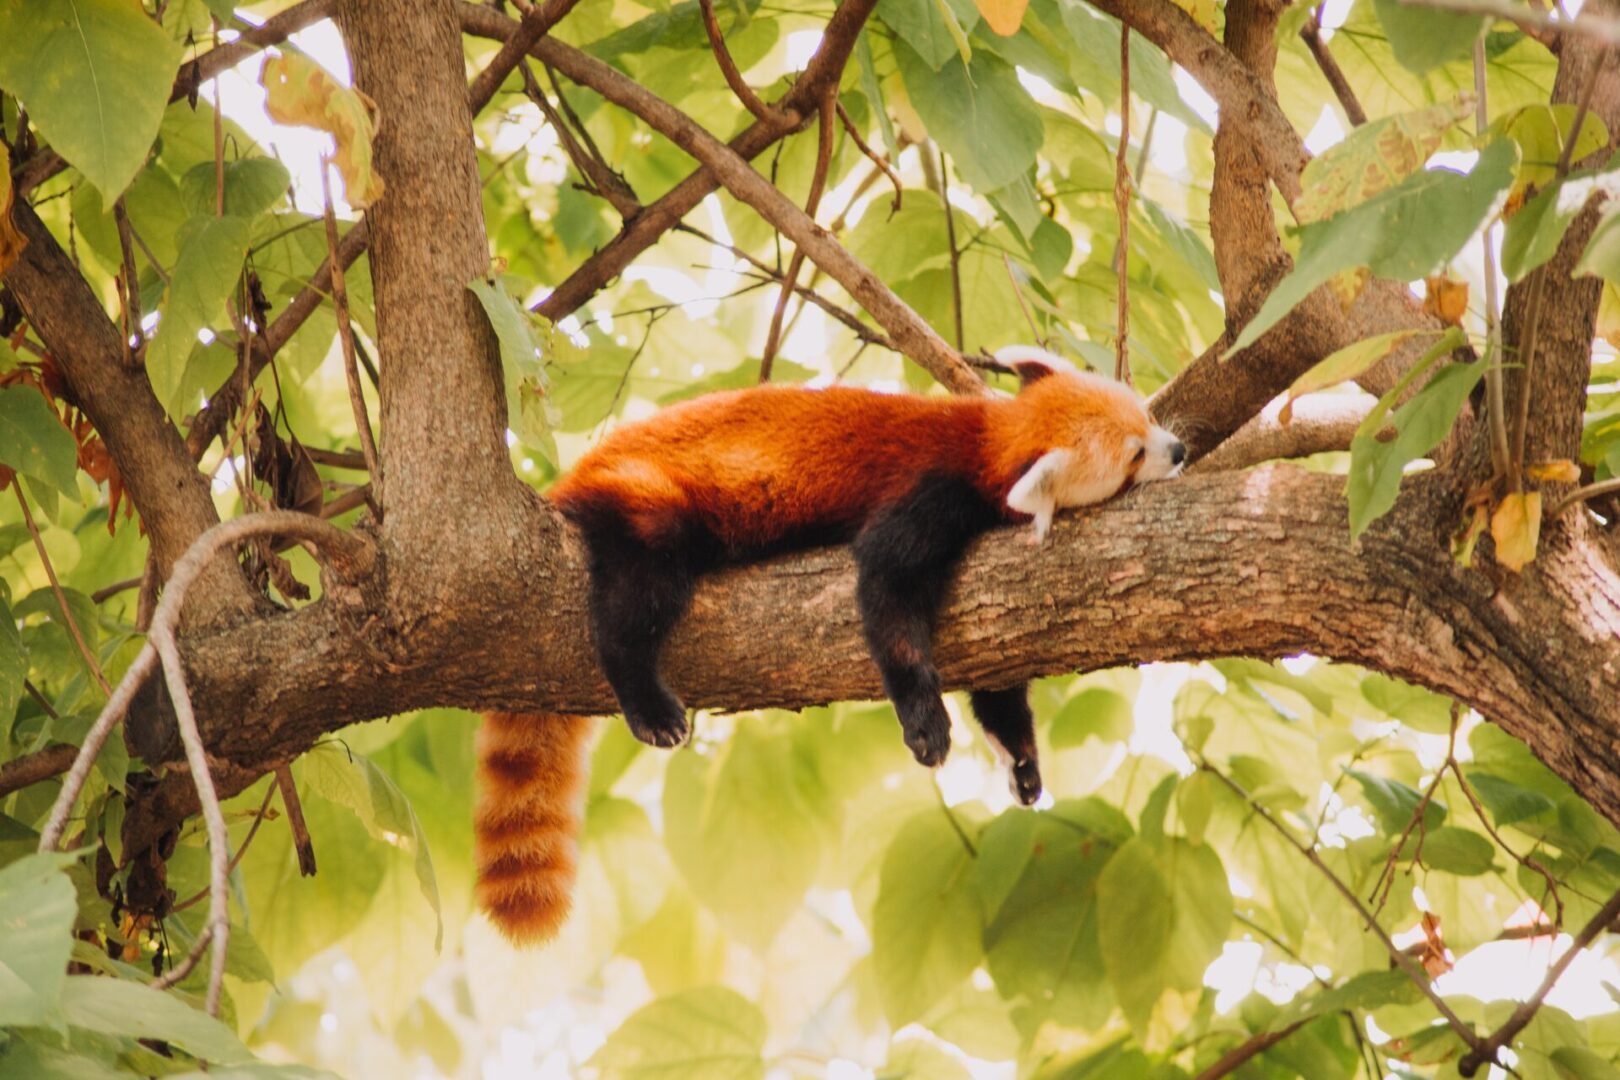 Red pandas are endangered, how can we help them?